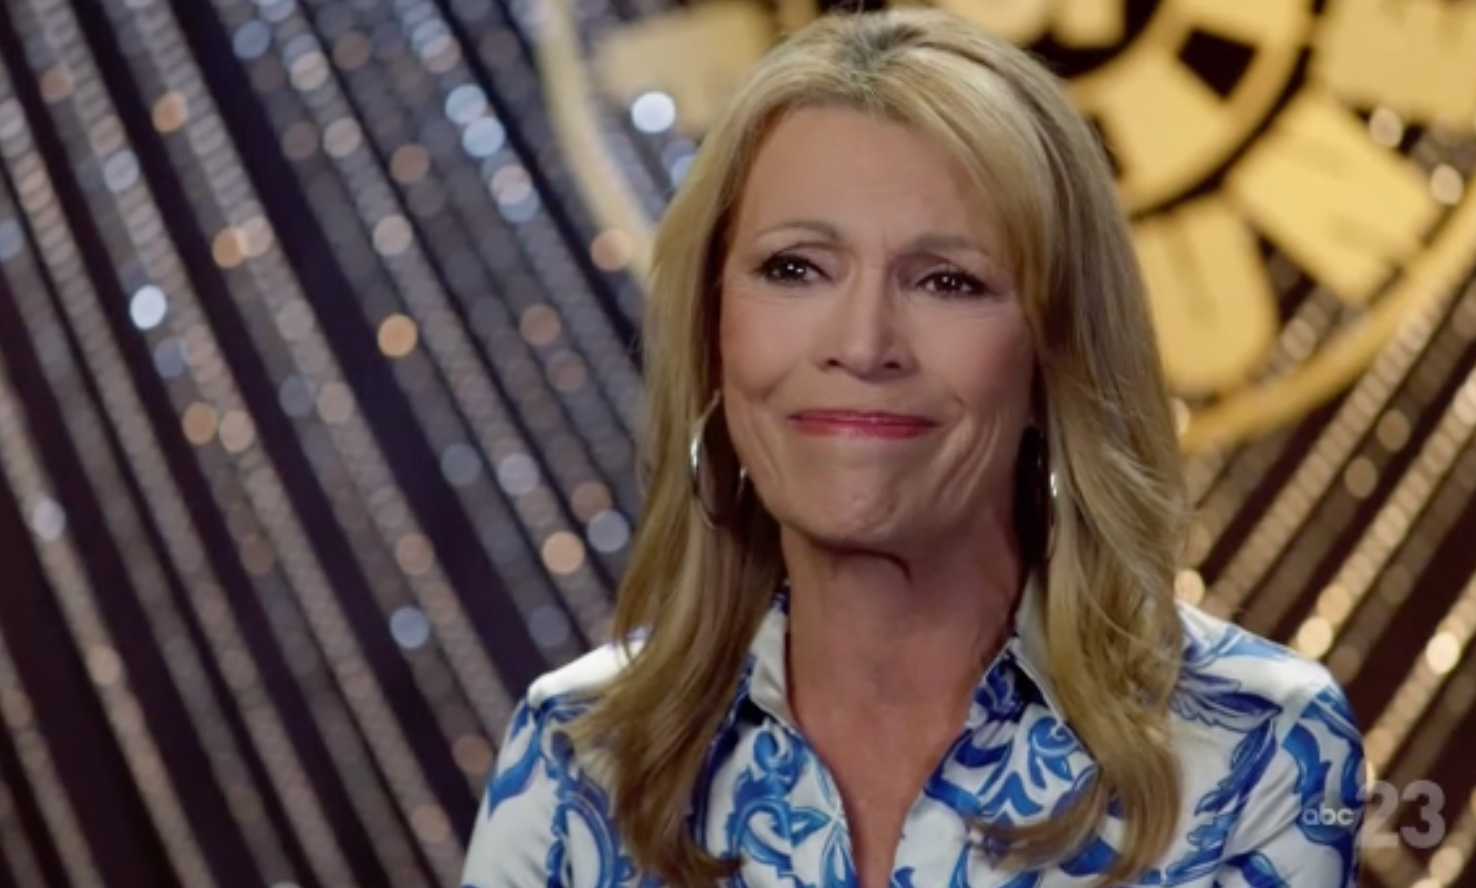 Before his last show, Vanna White cried in the most moving video message, 'I love you, Pat'